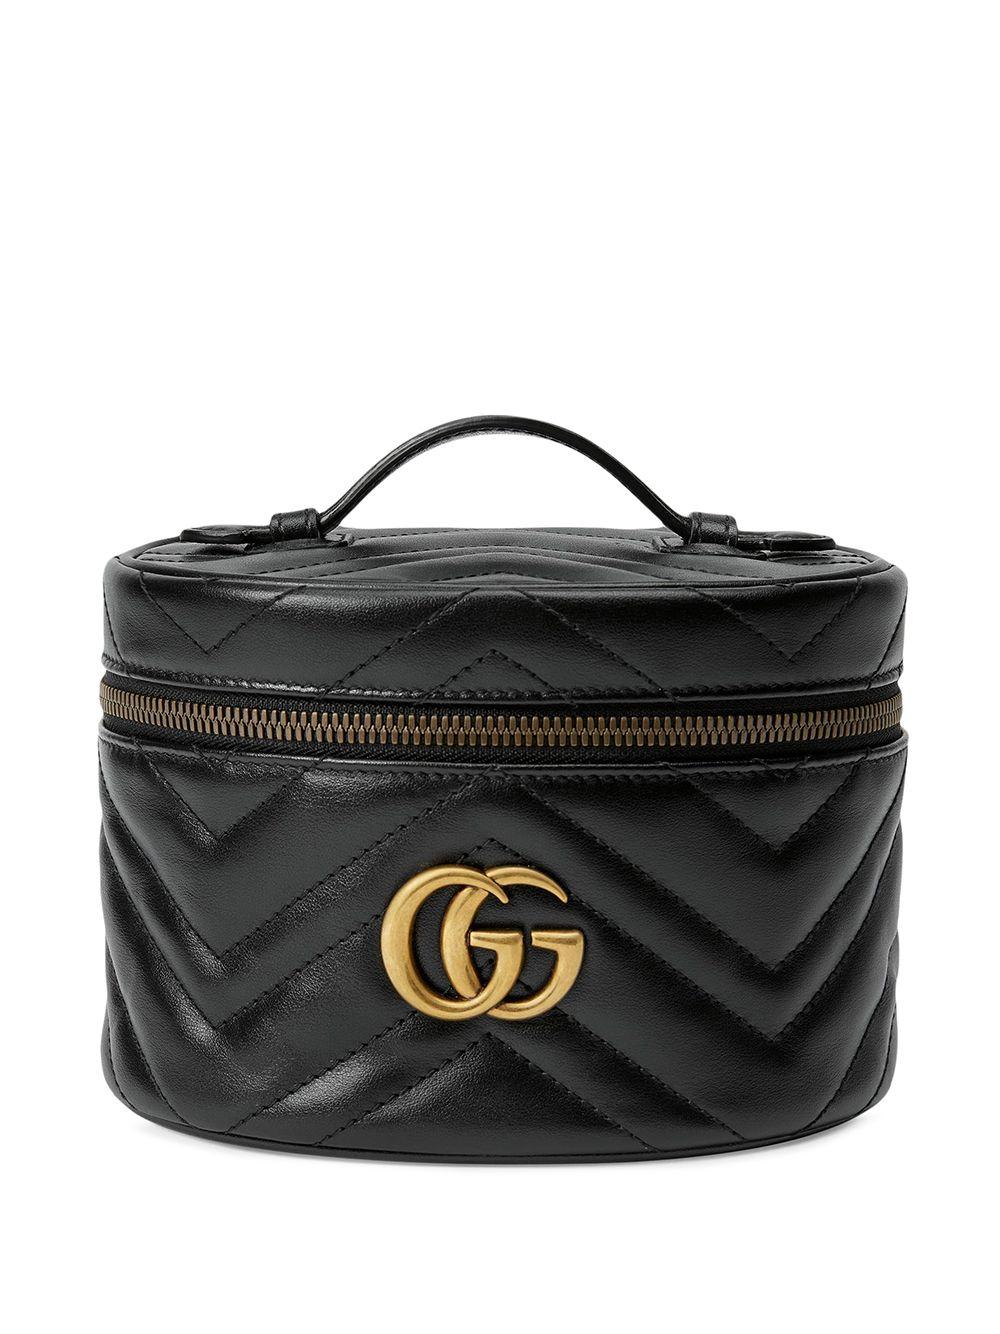 Gucci Leather gg Cosmetic Case in Black Lyst